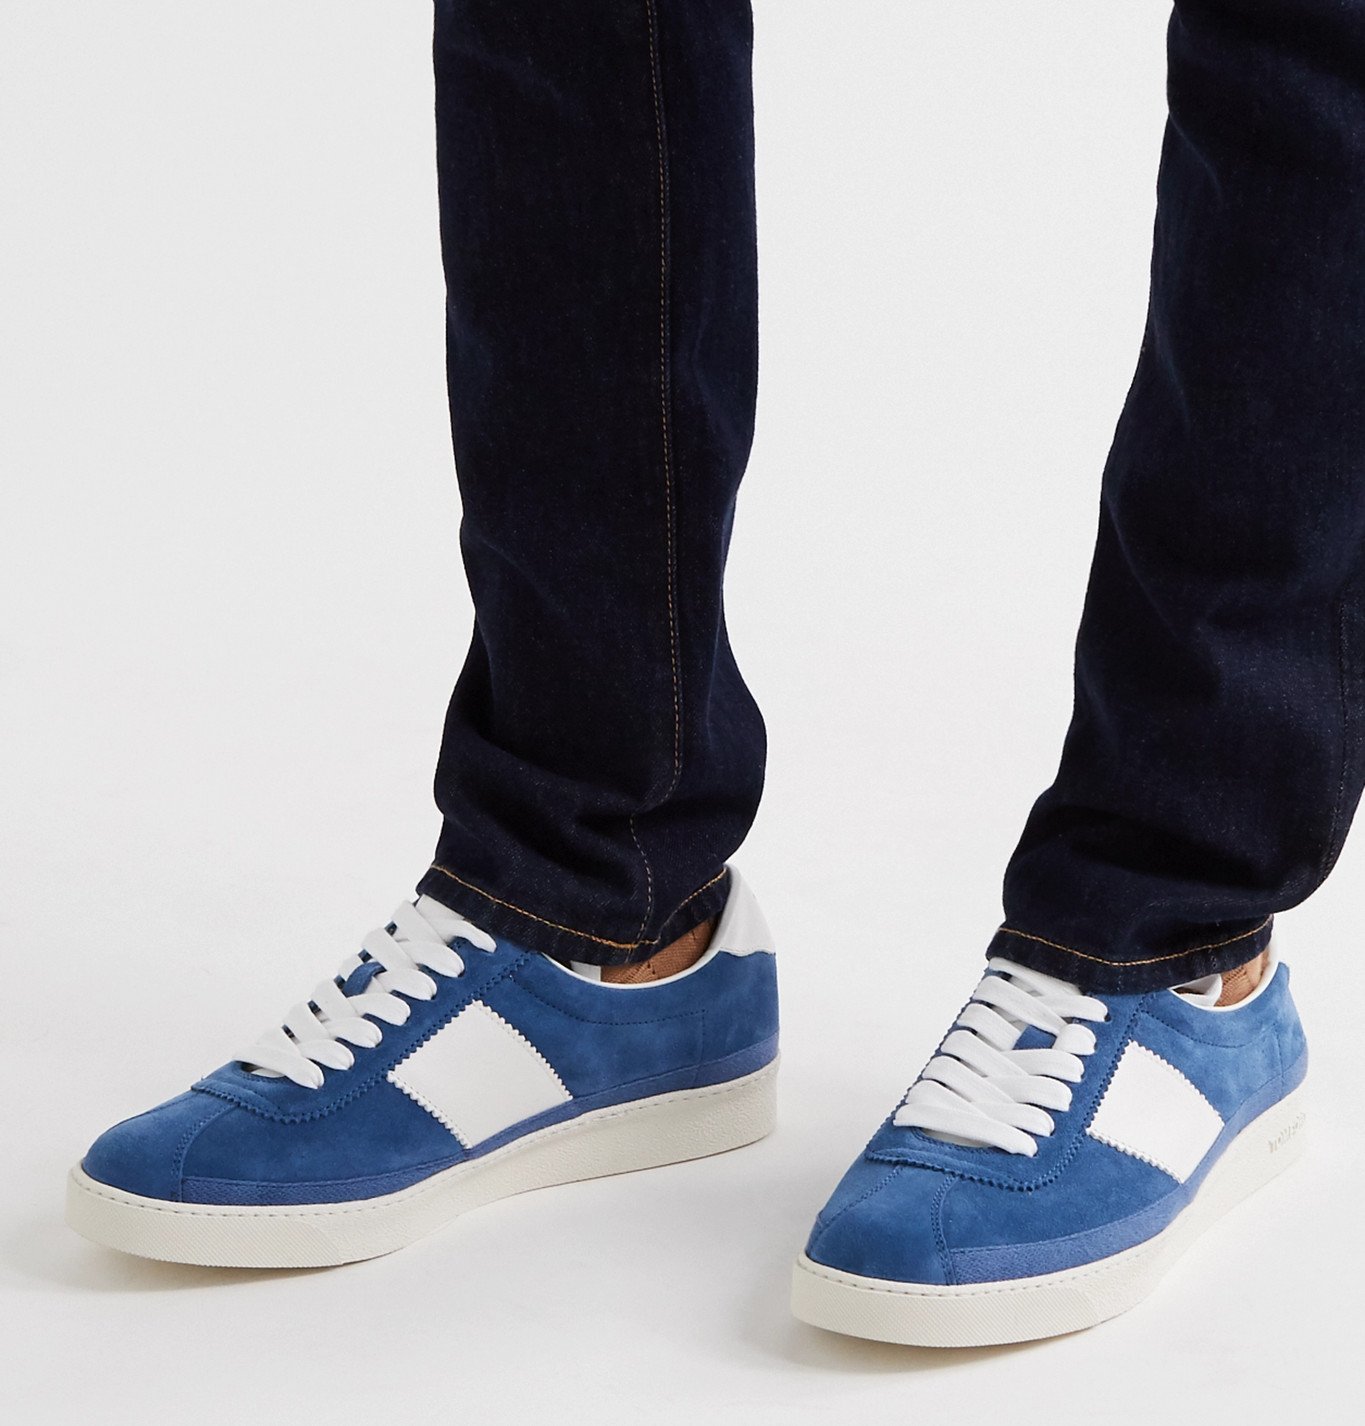 TOM FORD - Bannister Leather-Trimmed Suede Sneakers - Blue TOM FORD